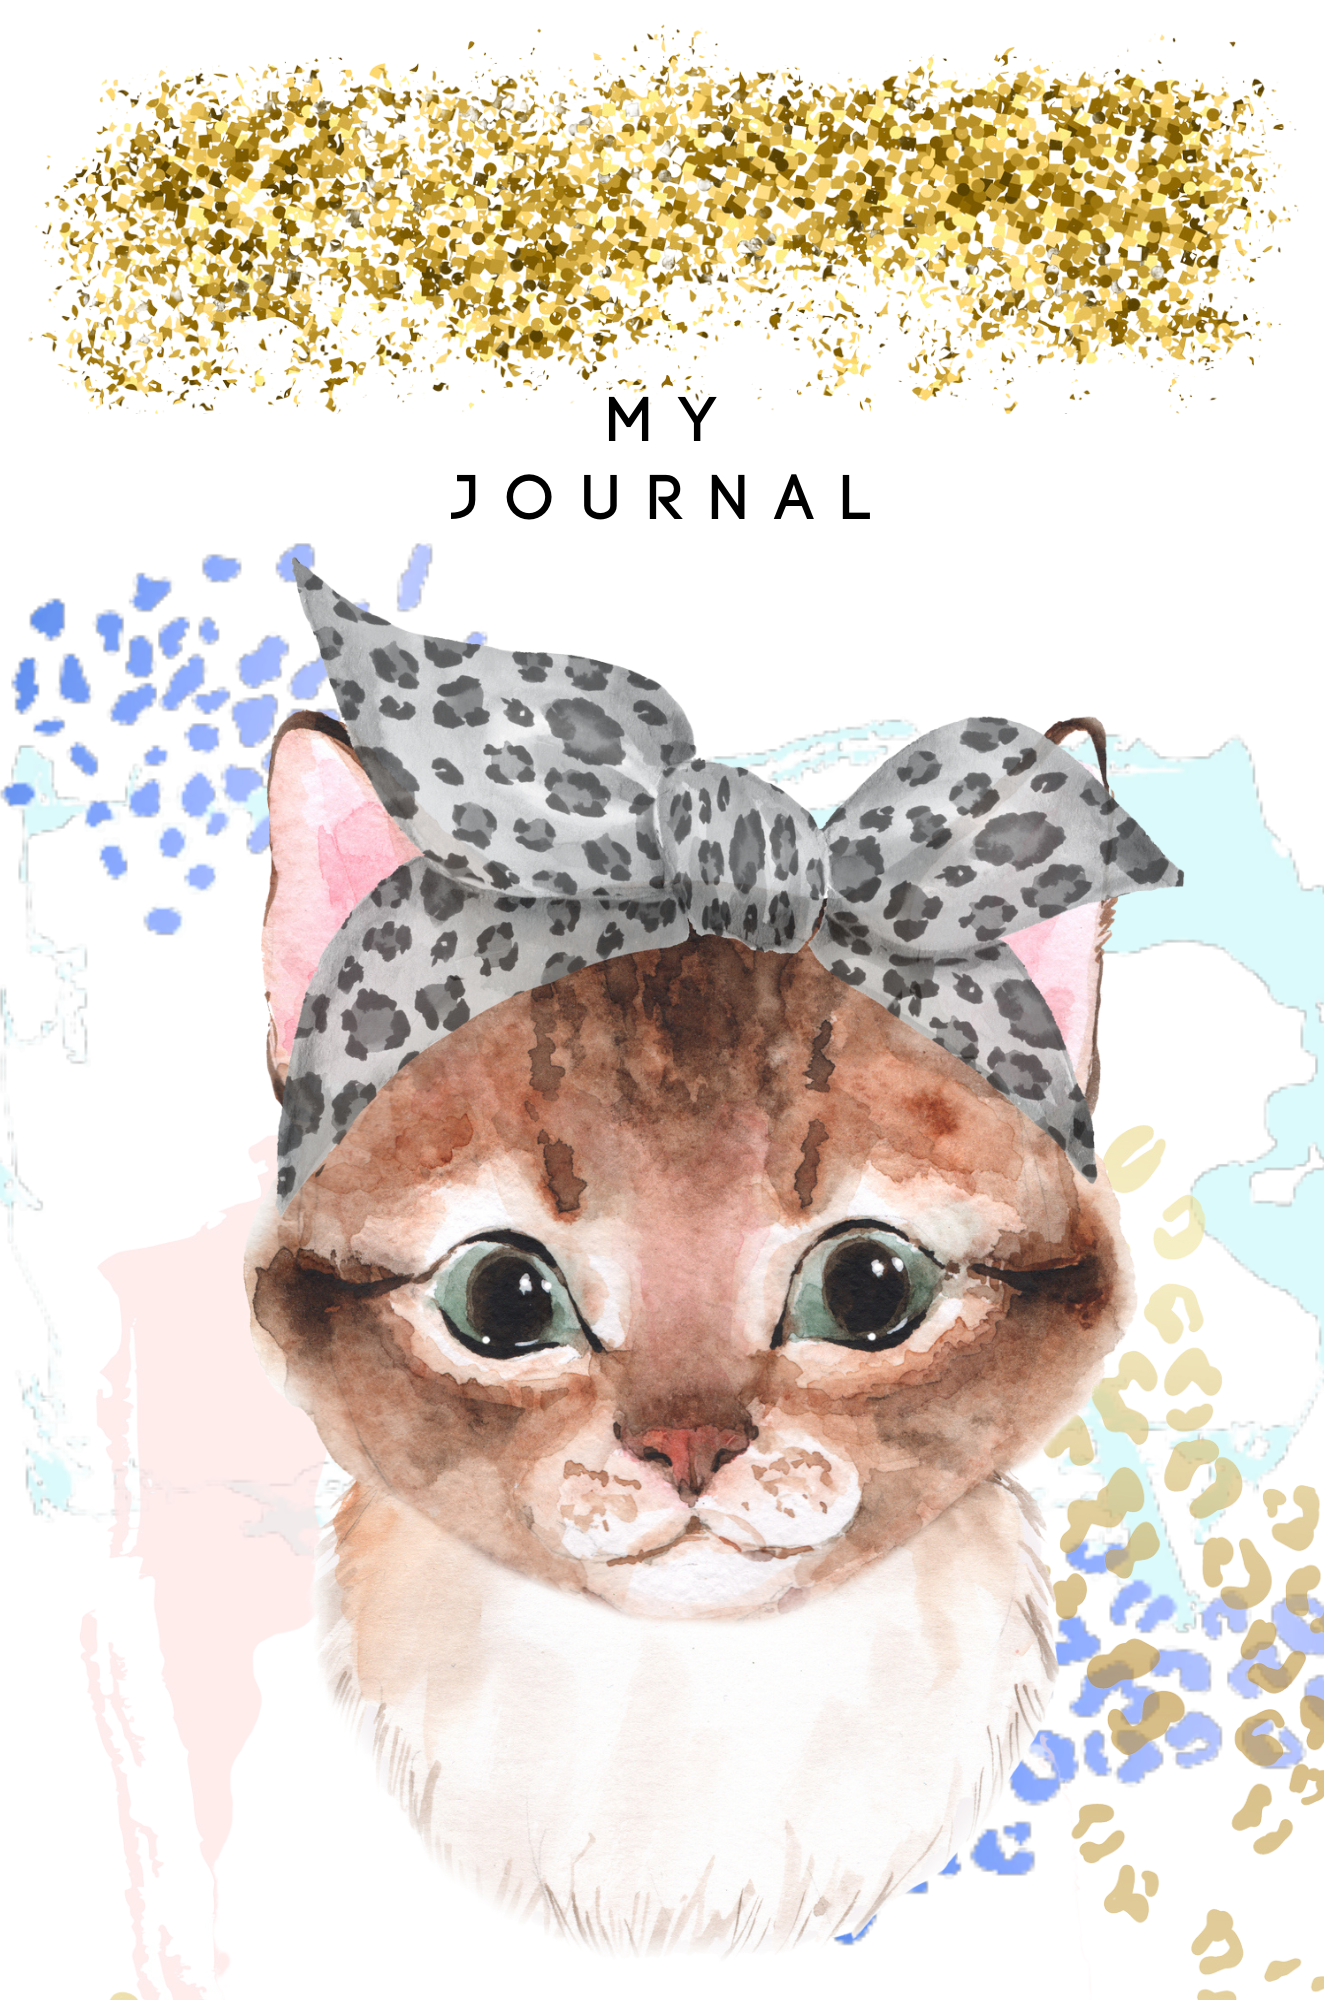 Kids Journal - Creative Journal, Diary, Notebook for Kids to Capture Their Thoughts